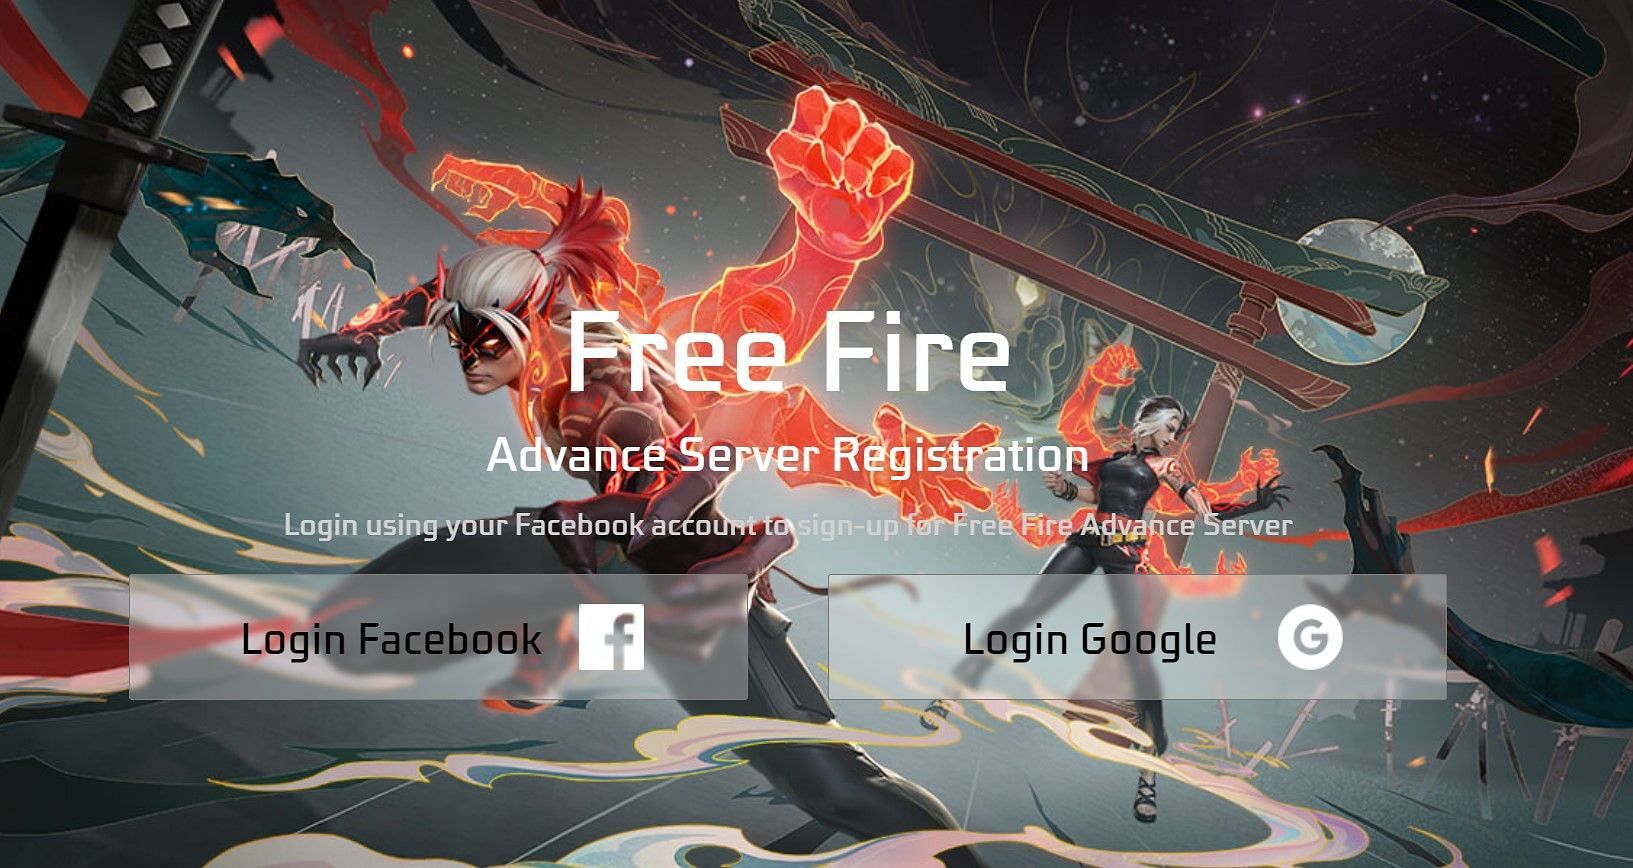 Follow the steps below to complete the registration (Image via Garena)